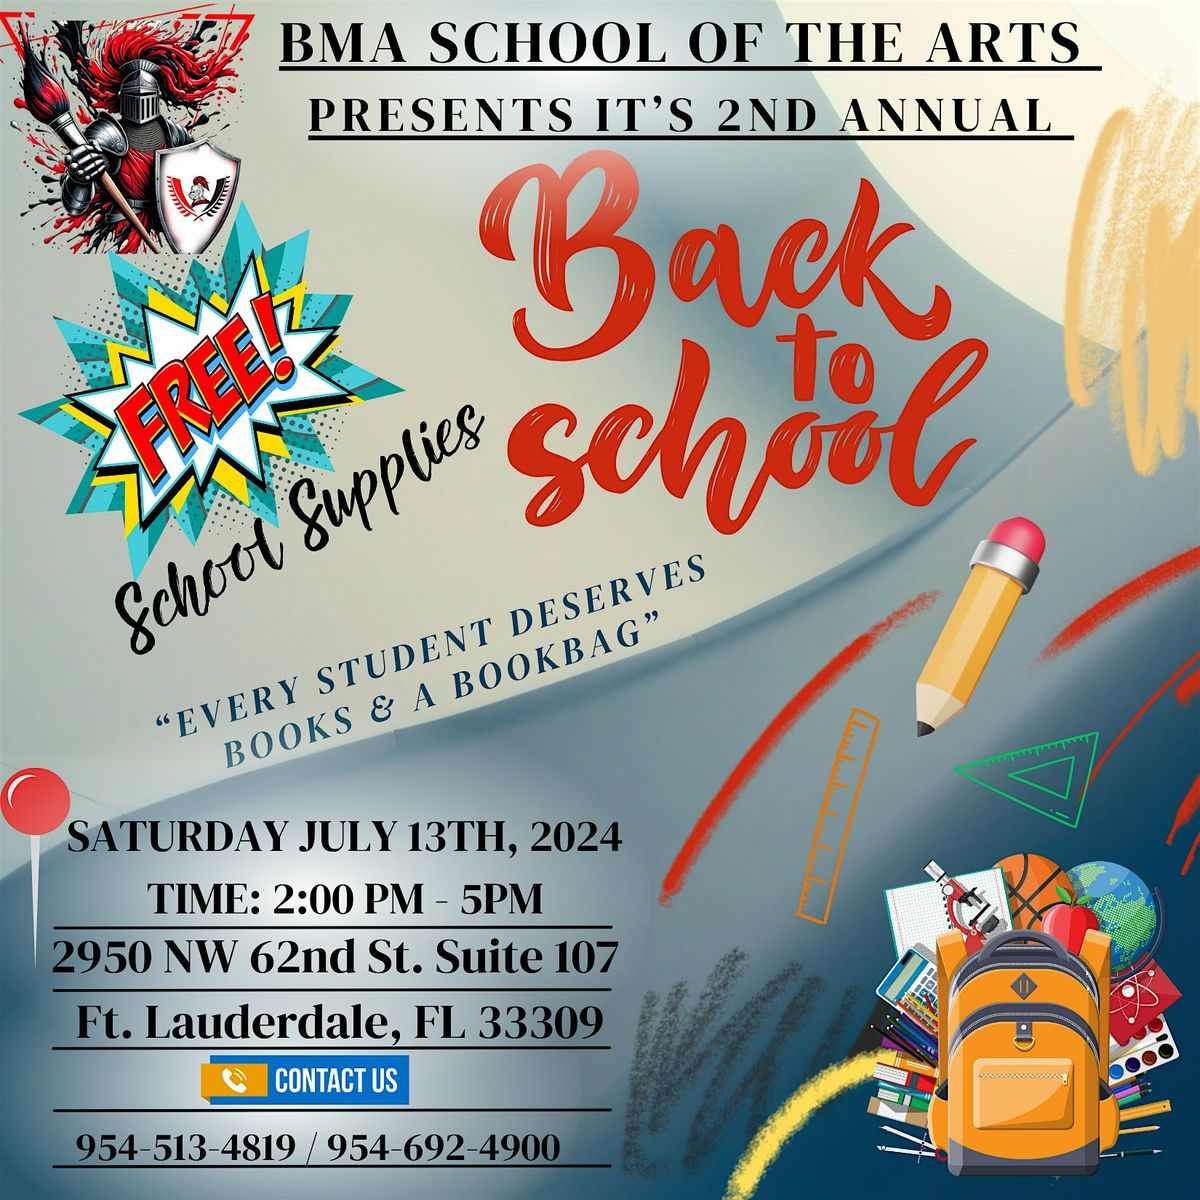 BRILLIANT MINDS ACADEMY SCHOOL OF THE ARTS  "2ND ANNUAL BACK 2 SCHOOL DRIVE